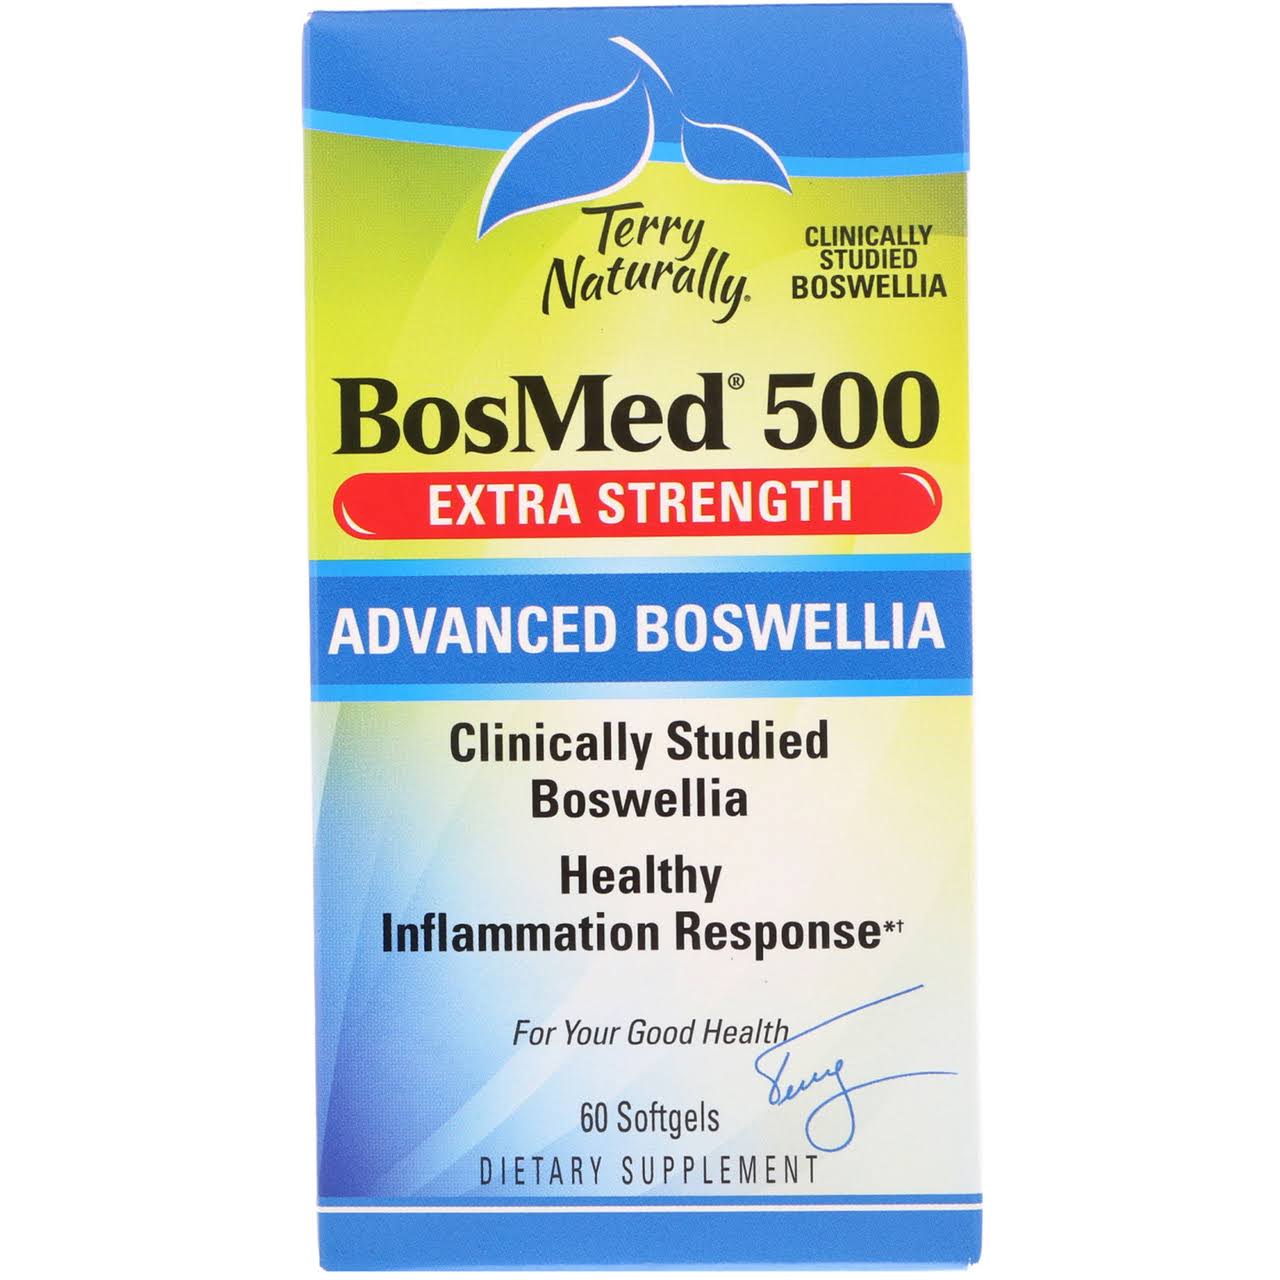 Bosmed 500 Advanced Boswellia Supplement - Extra Strength, 60 Softgels